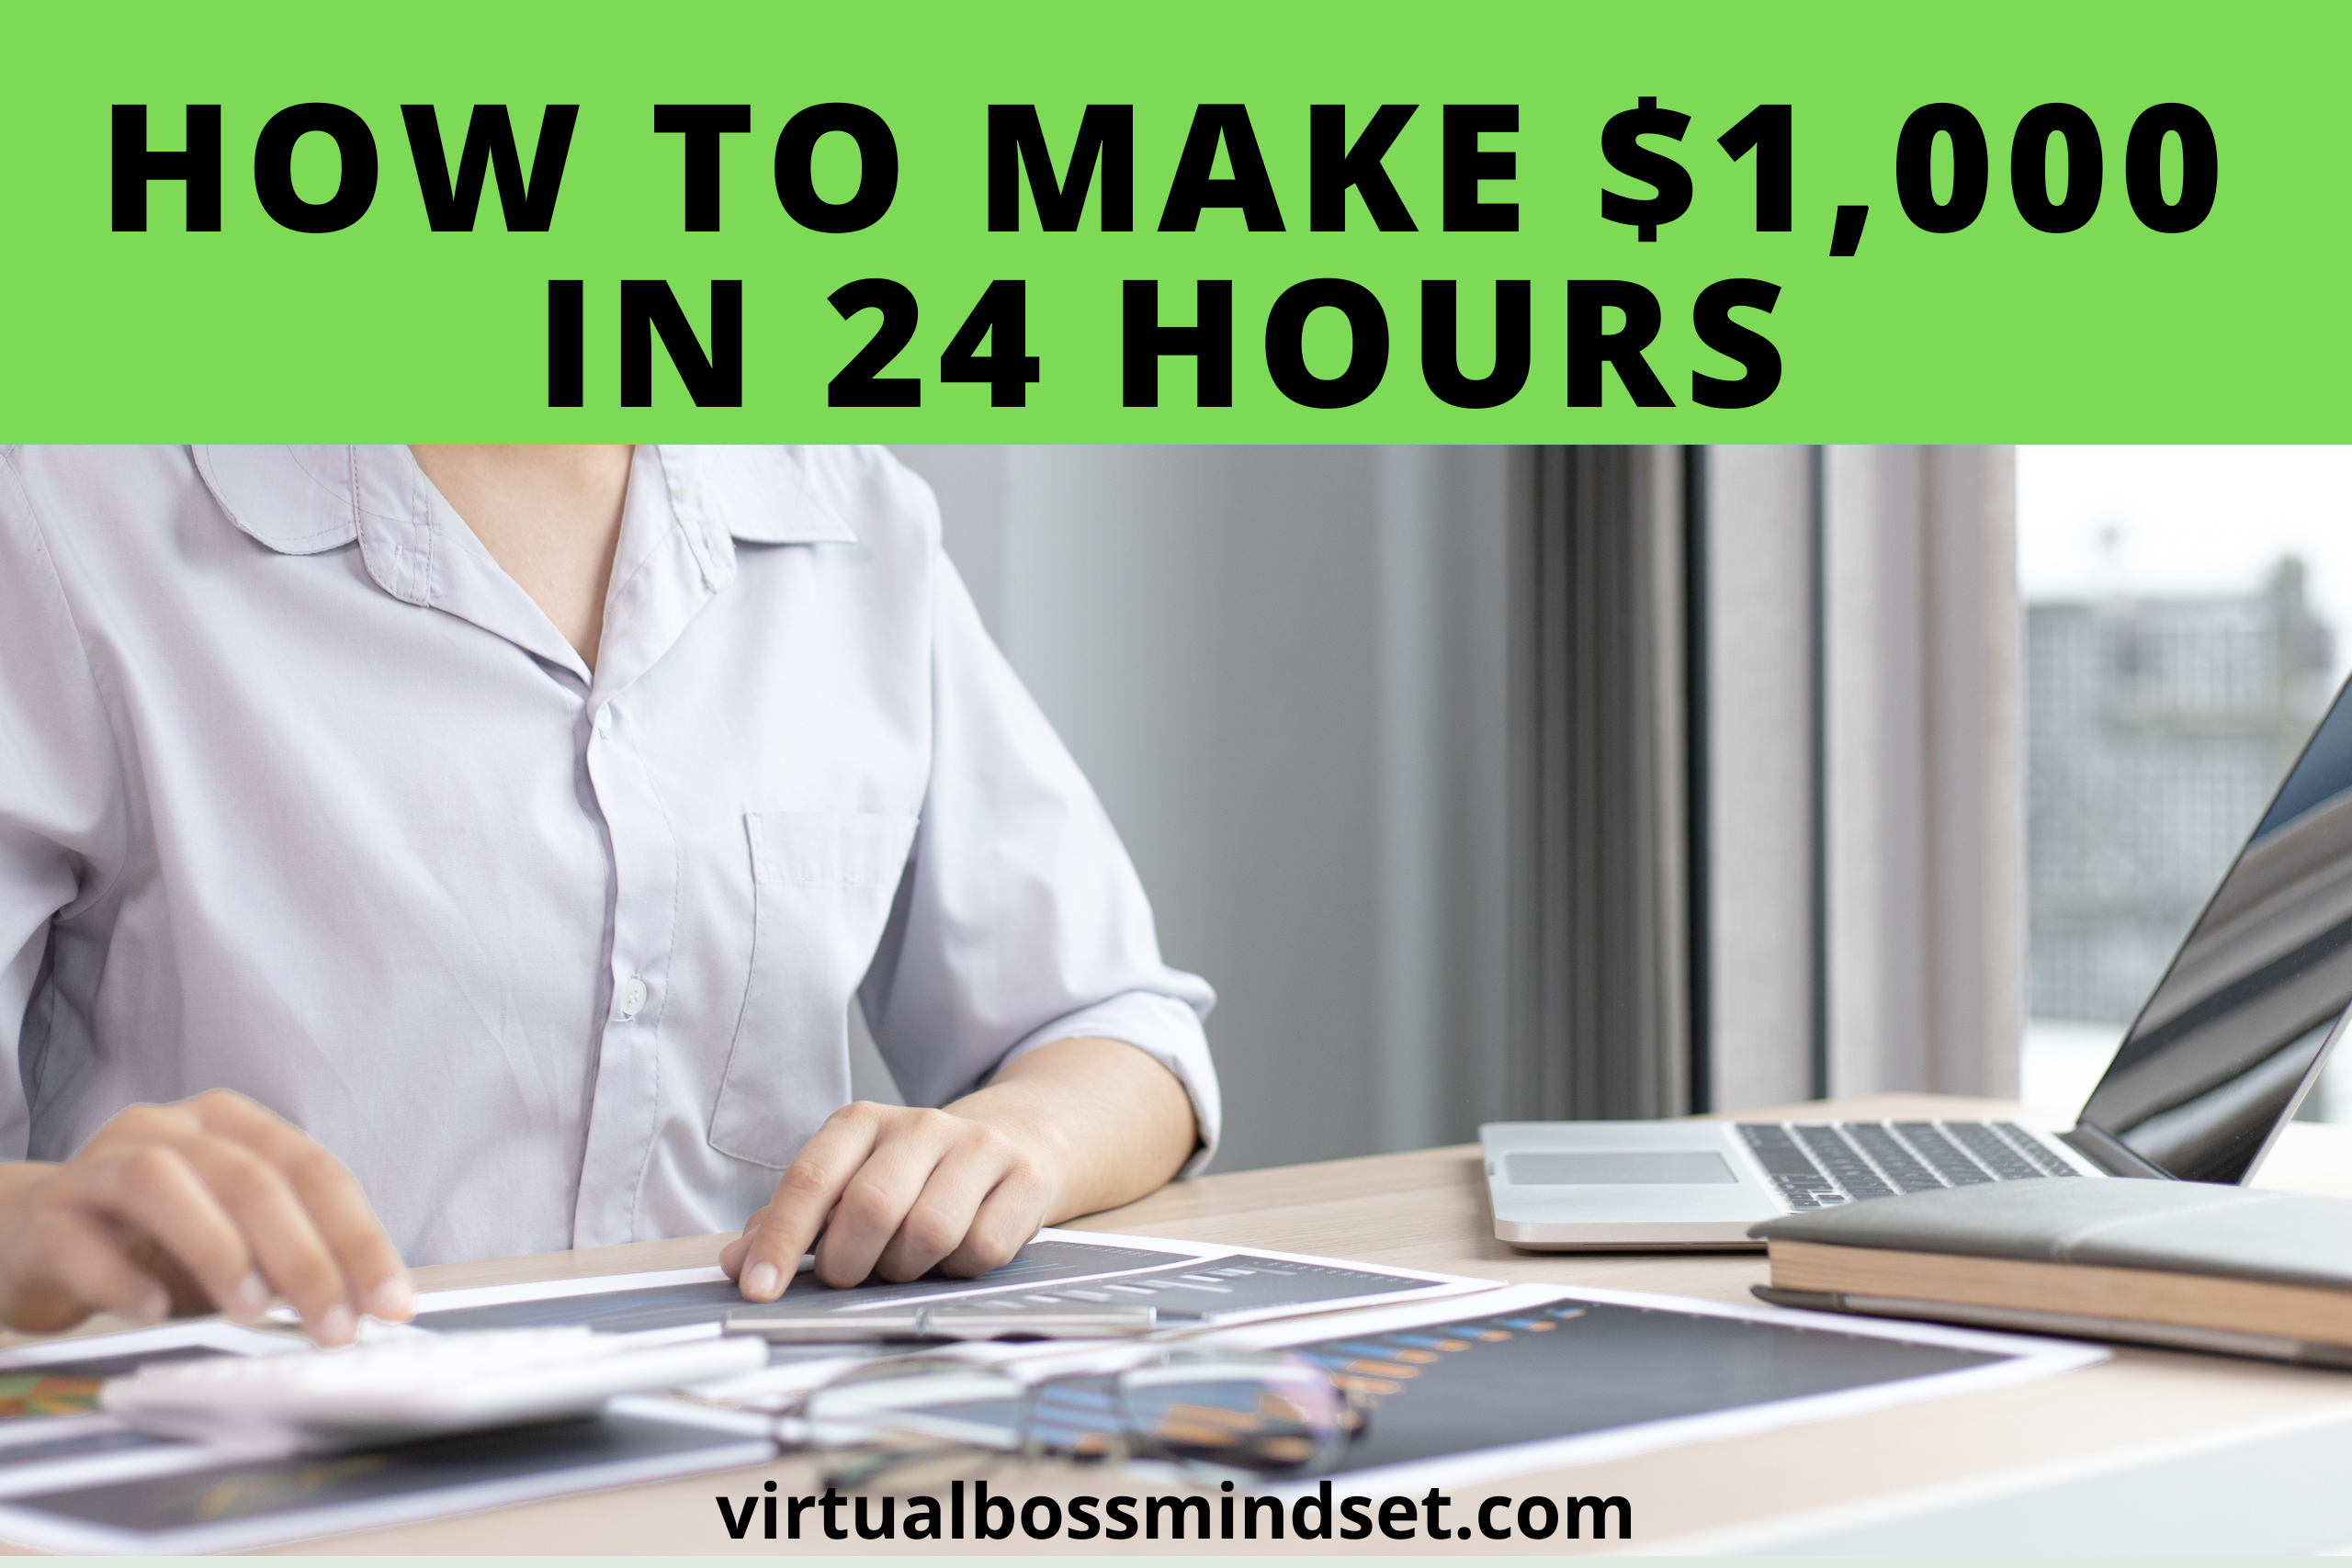 How to Make $1,000 in 24 Hours (11 Legit Ways)